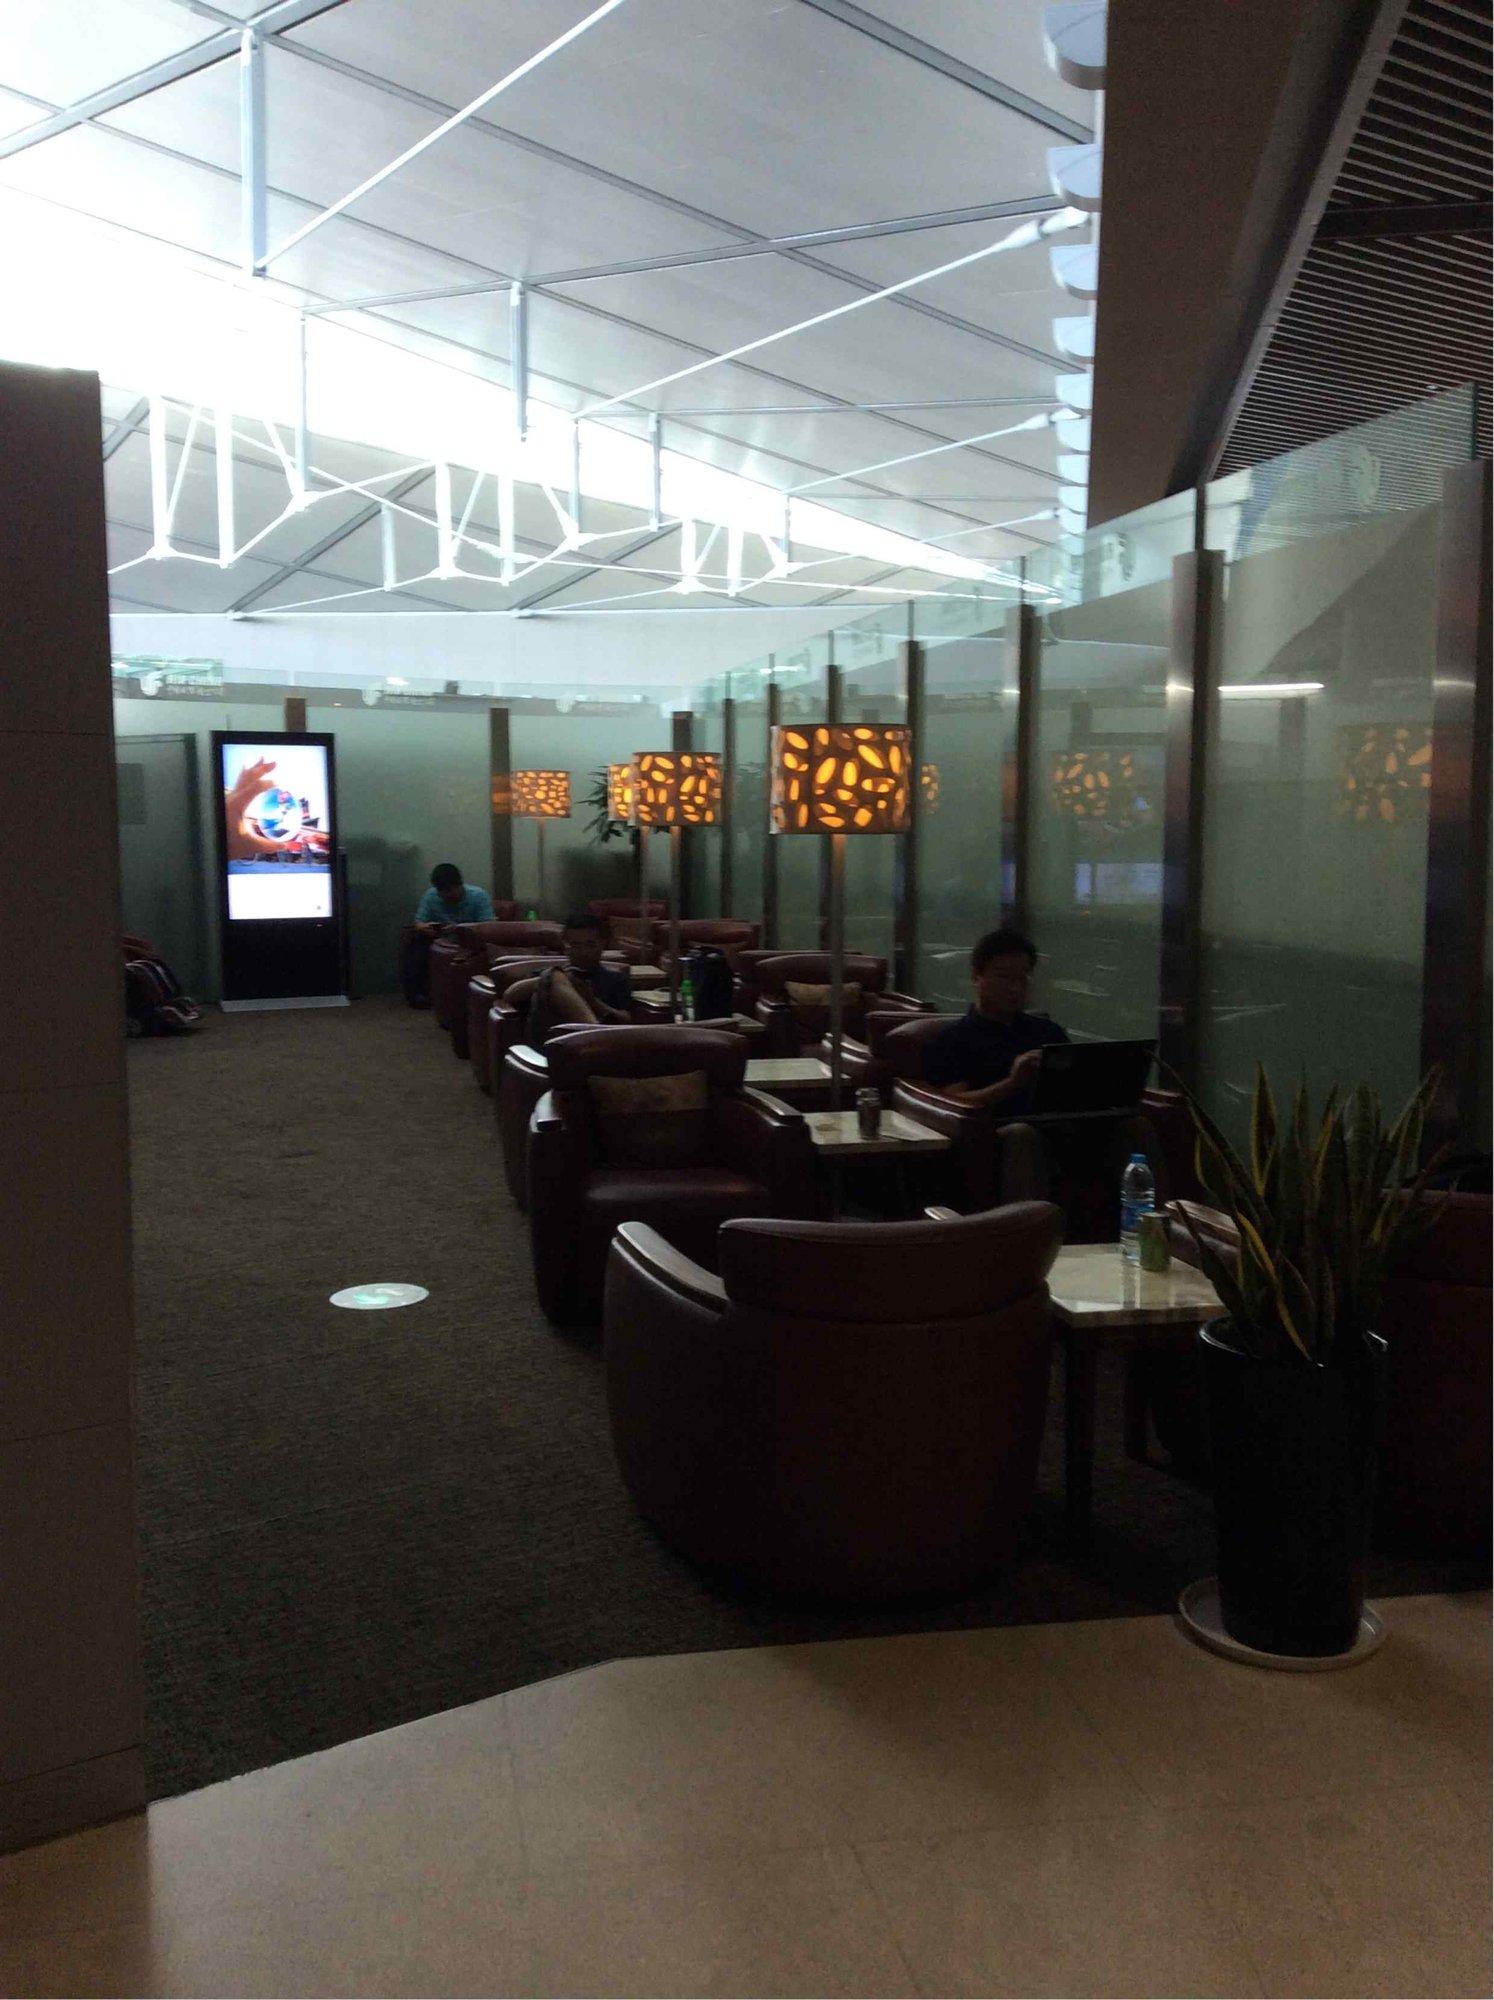 V3 Air China First & Business Class Lounge image 4 of 5